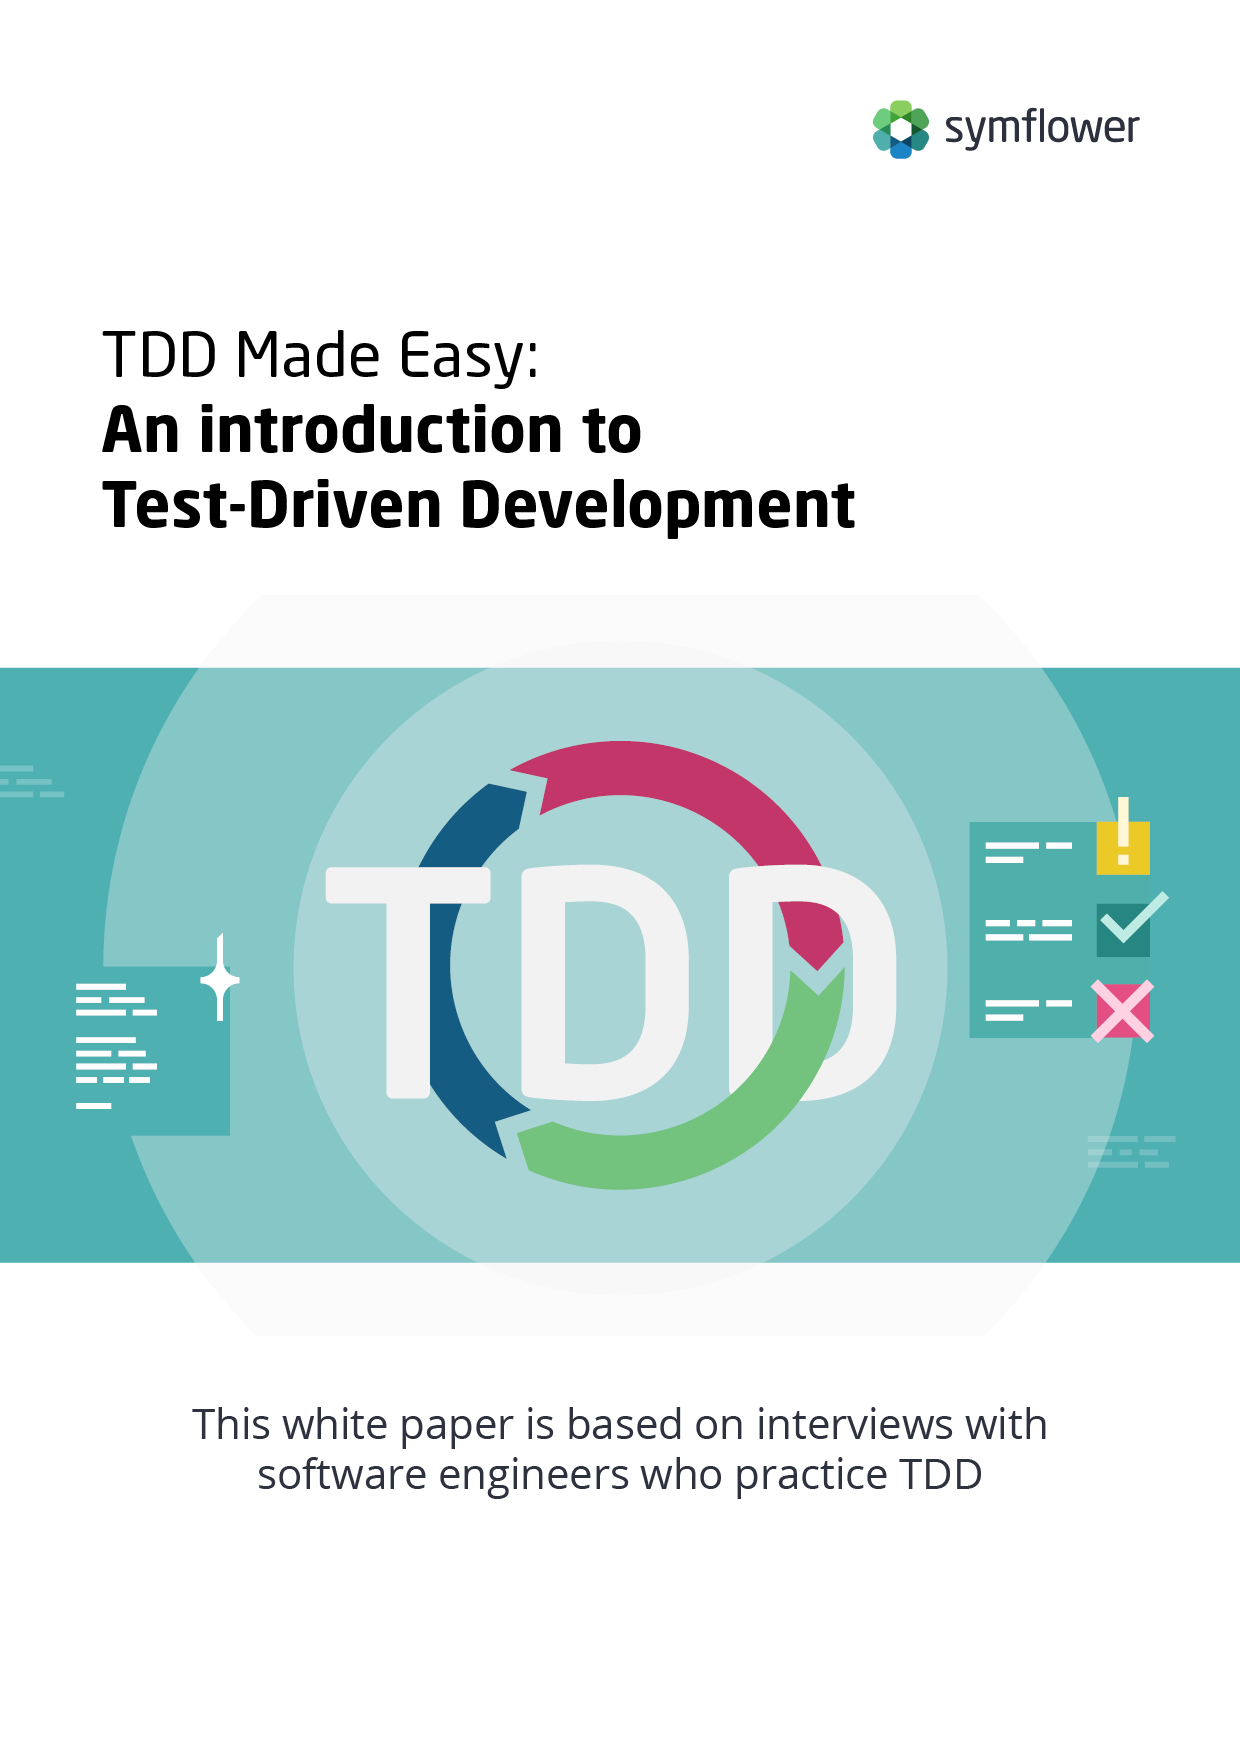 Download Symflower's white paper: An introduction to Test-Driven Development